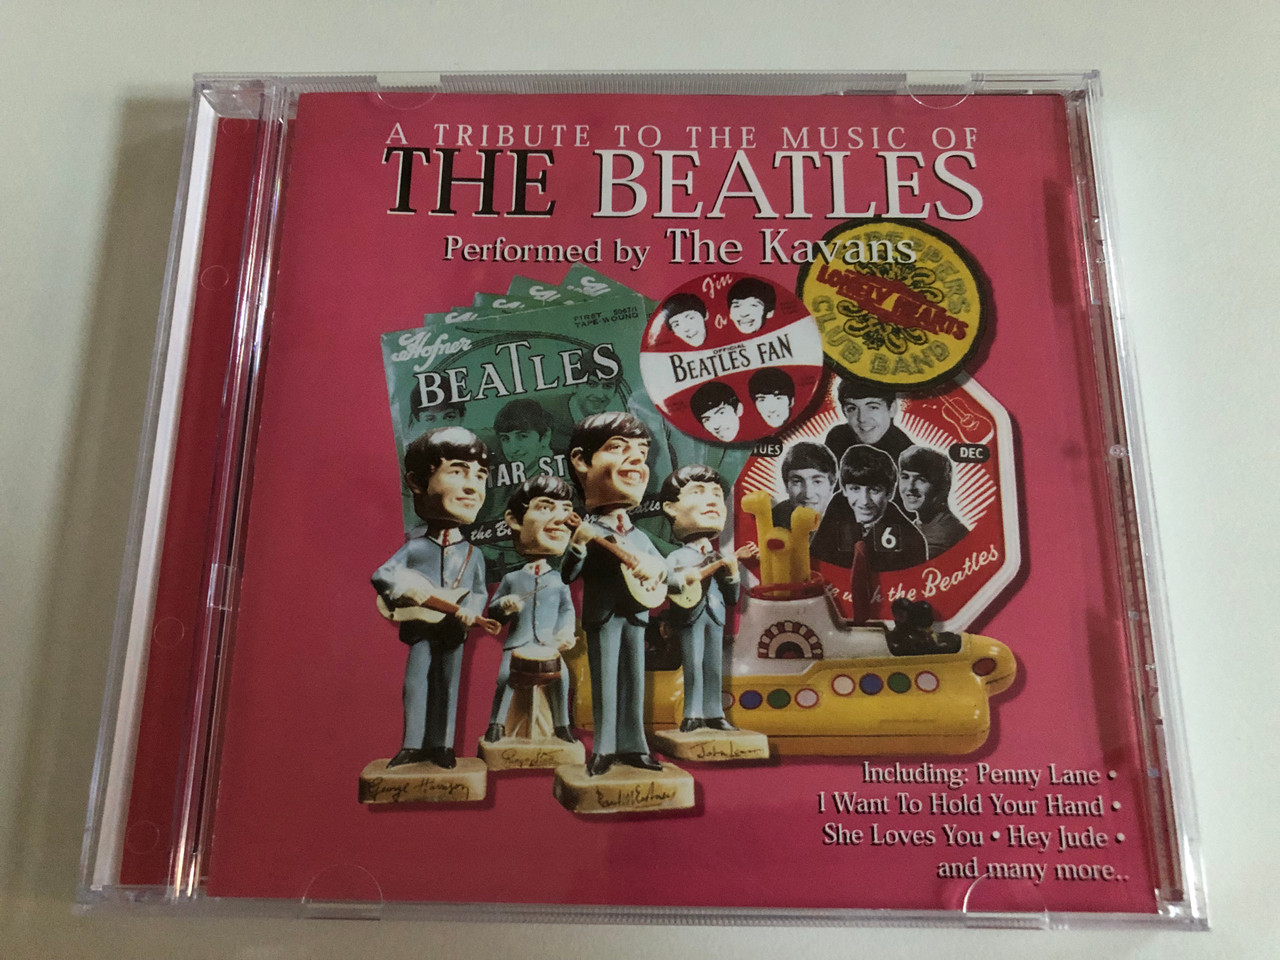 https://cdn10.bigcommerce.com/s-62bdpkt7pb/products/0/images/187394/A_Tribute_To_The_Music_Of_The_Beatles_-_Performed_by_The_Kavans_Including_Penny_Lane_I_Want_To_Hold_Your_Hand_She_Loves_You_Hey_Jude_and_many_more_Cosmopolitan_Audio_CD_2000_40577-2_1__06773.1628830083.1280.1280.JPG?c=2&_gl=1*1nfzv71*_ga*MjA2NTIxMjE2MC4xNTkwNTEyNTMy*_ga_WS2VZYPC6G*MTYyODgyOTg2OC4zMS4xLjE2Mjg4MzAxOTkuNjA.